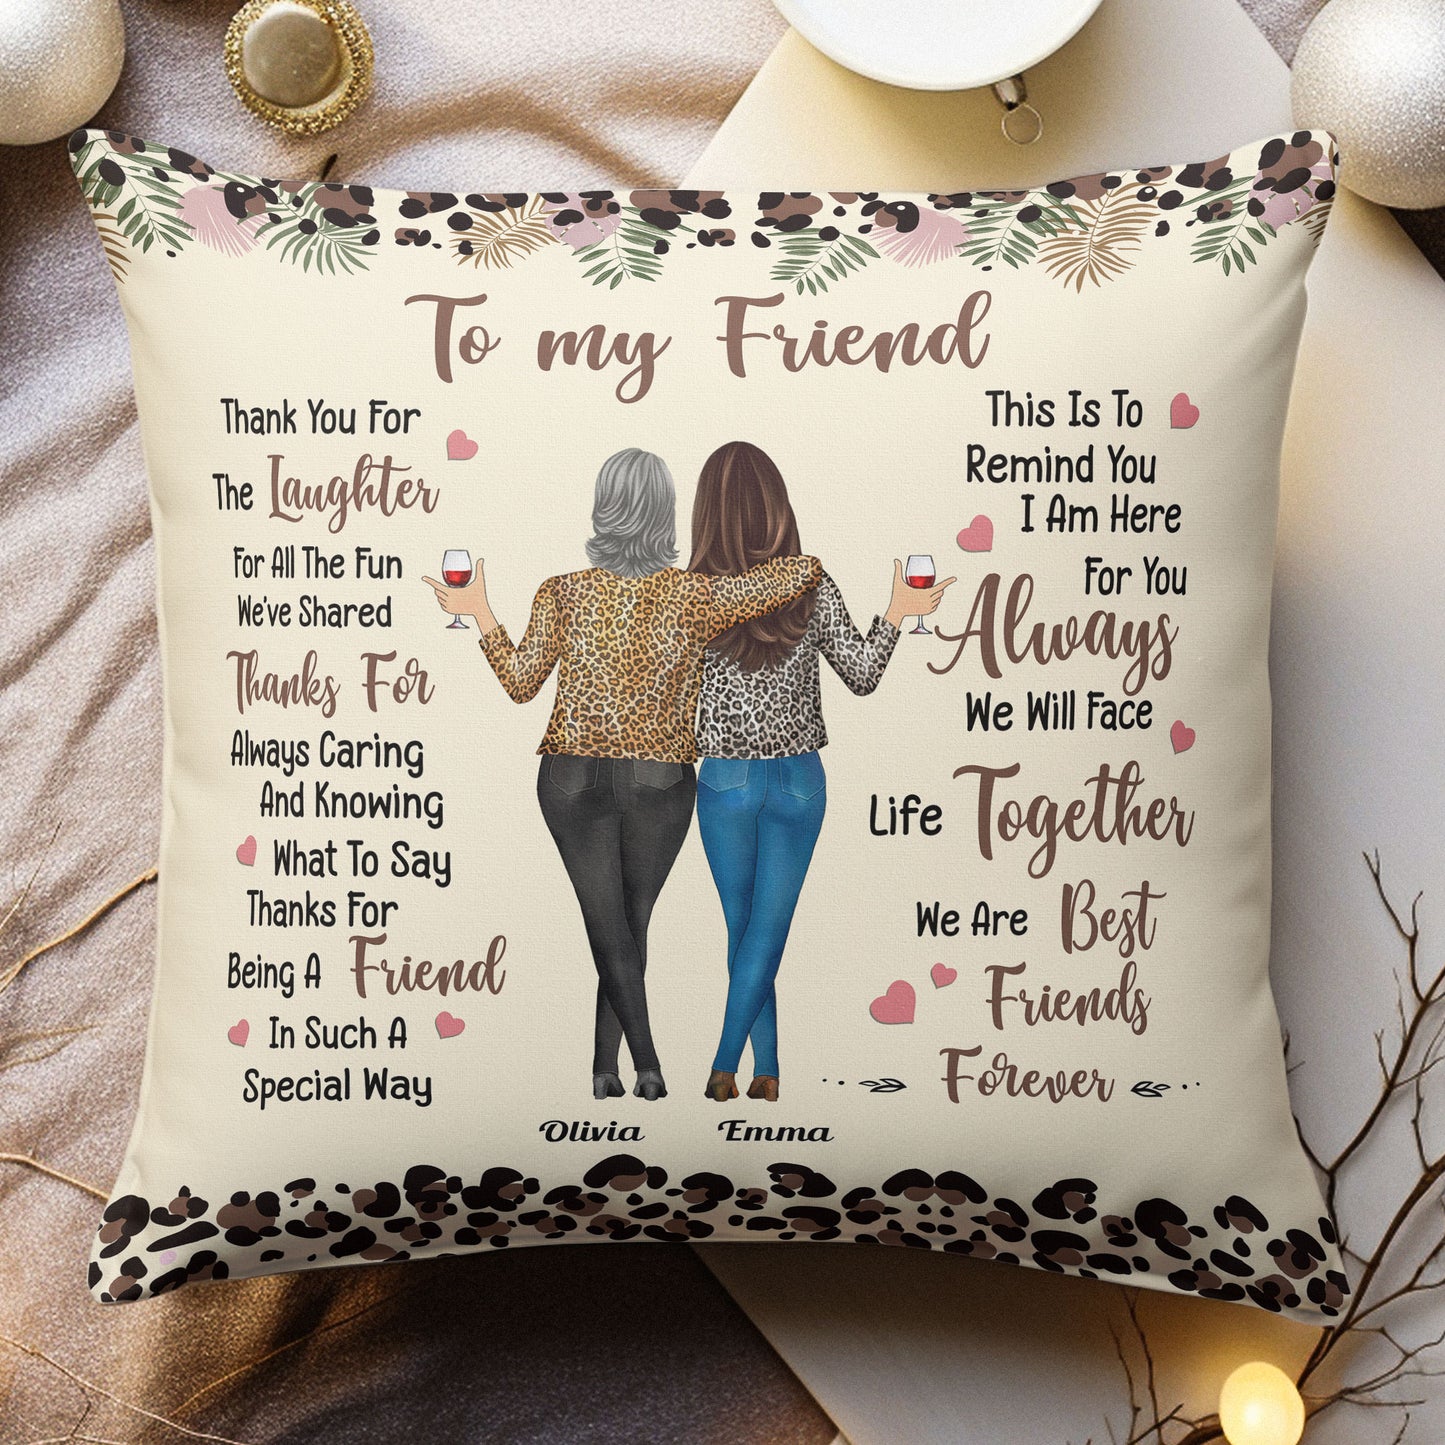 Sisters Forever - Personalized Pillow (Insert Included) – Macorner